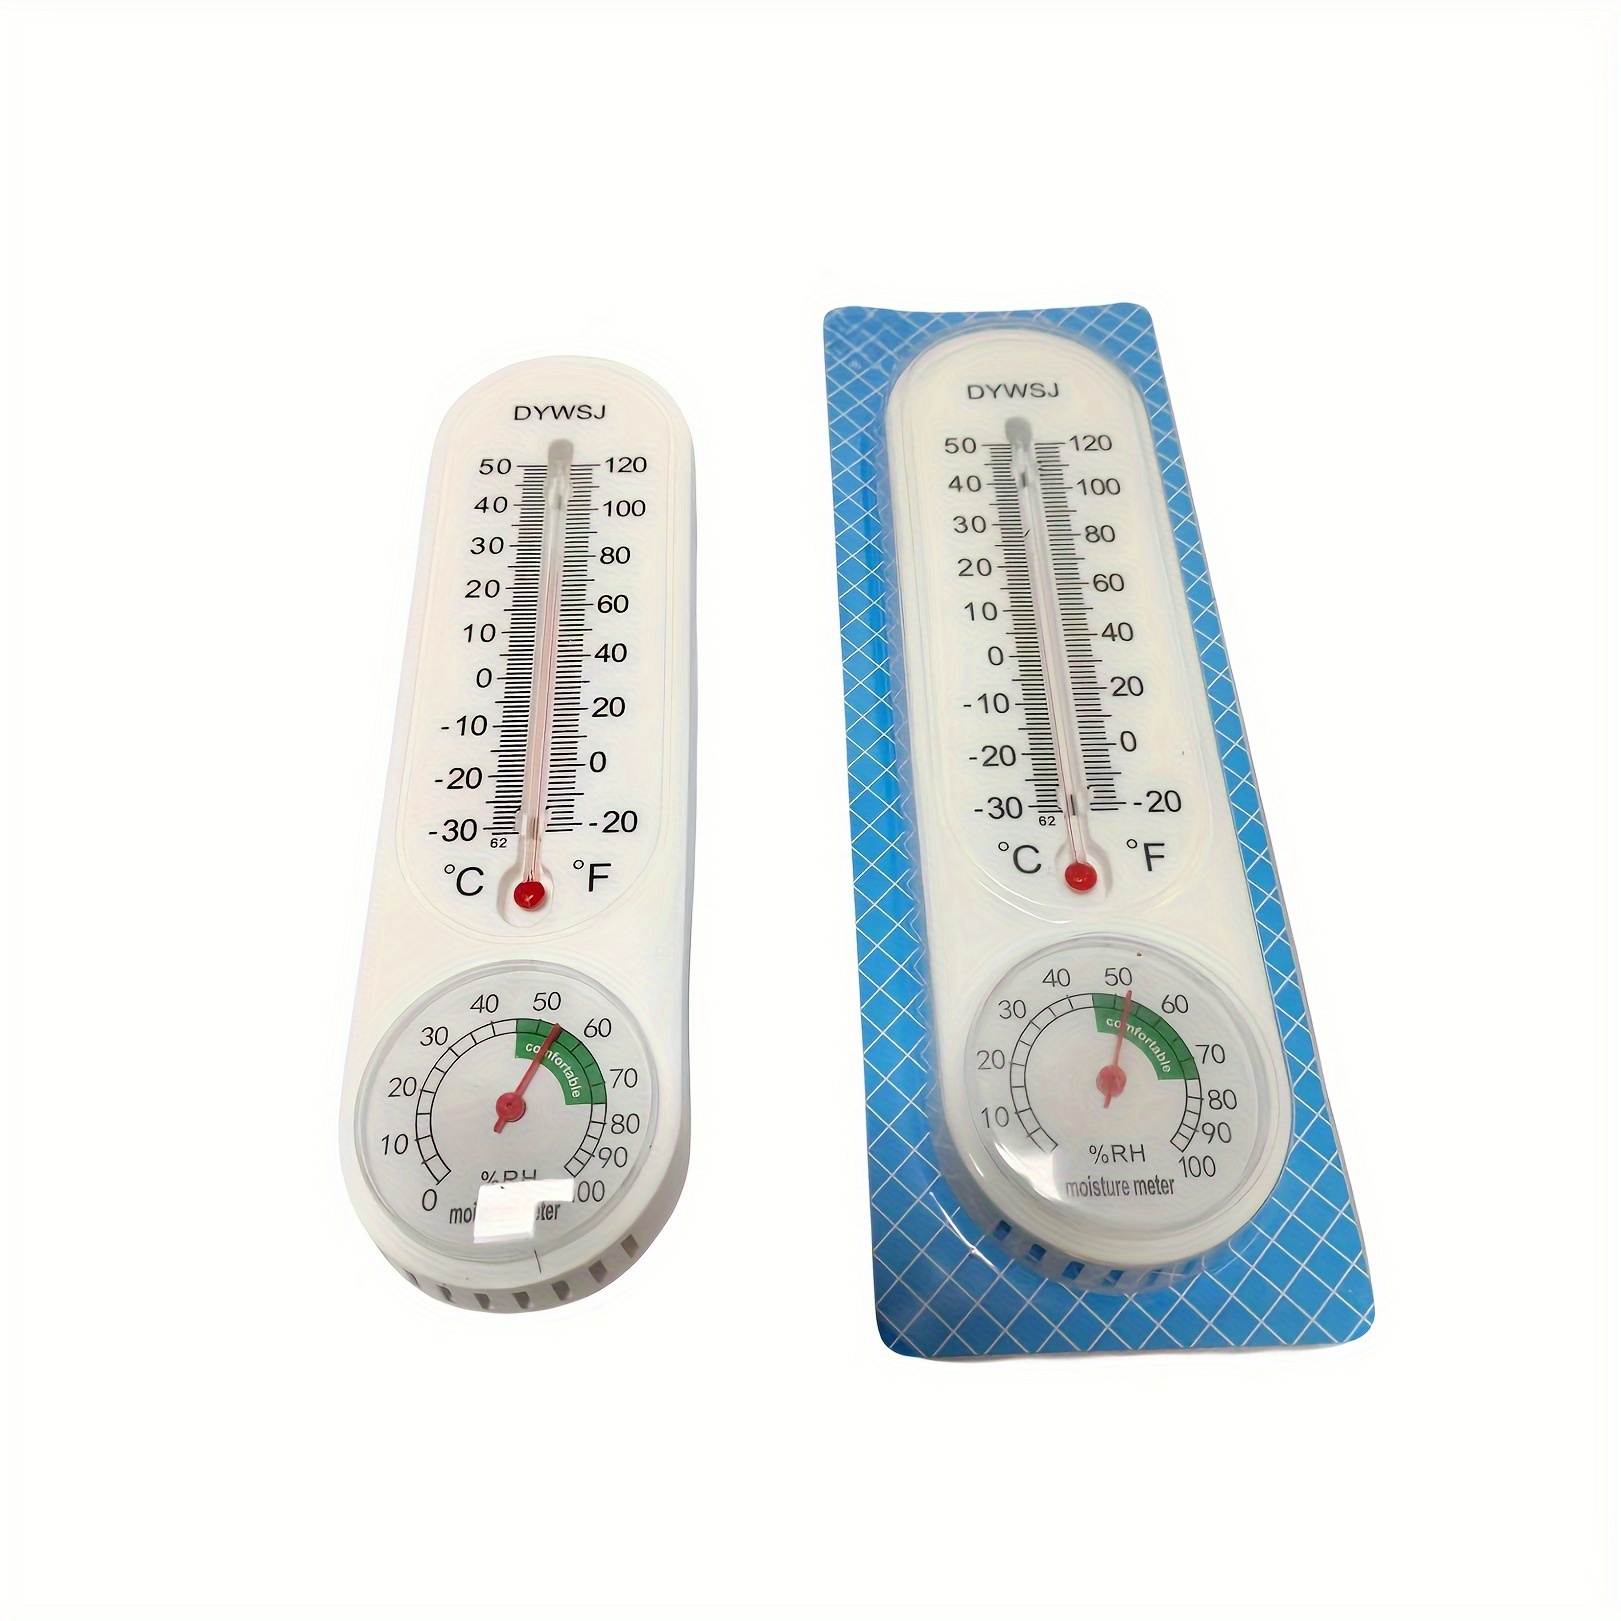 6Pcs Wall Mounted Thermometers, Temperature Gauge Meter with